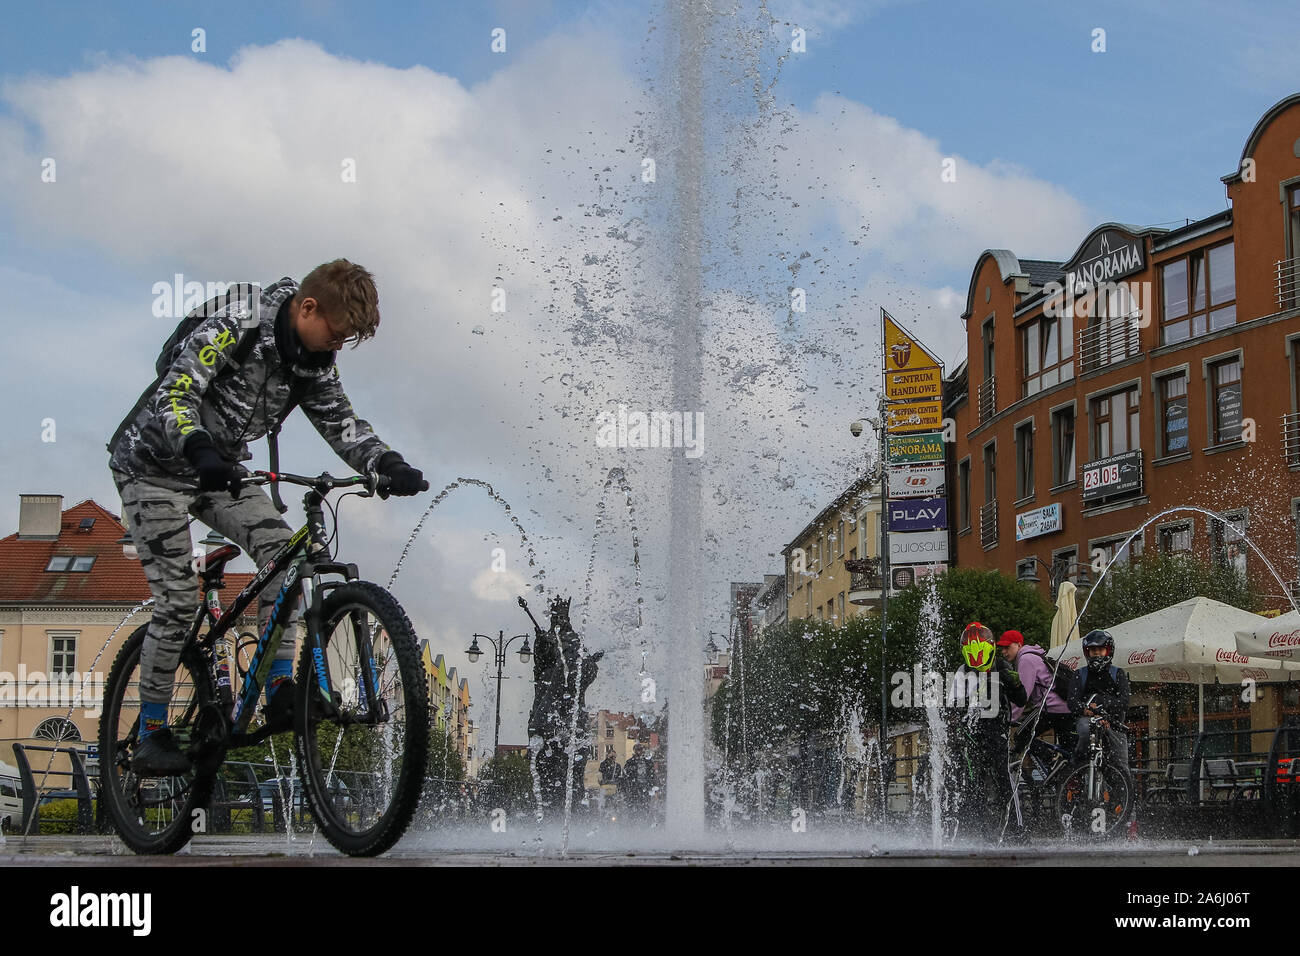 Children riding on bikes and scooters near the fountain in front of Casimir IV Jagiellon (Kazimierz Jagiellonczyk) monument are seen in the centre city of Malbork, Poland, on 18 May 2019  © Michal Fludra / Alamy Live News Stock Photo